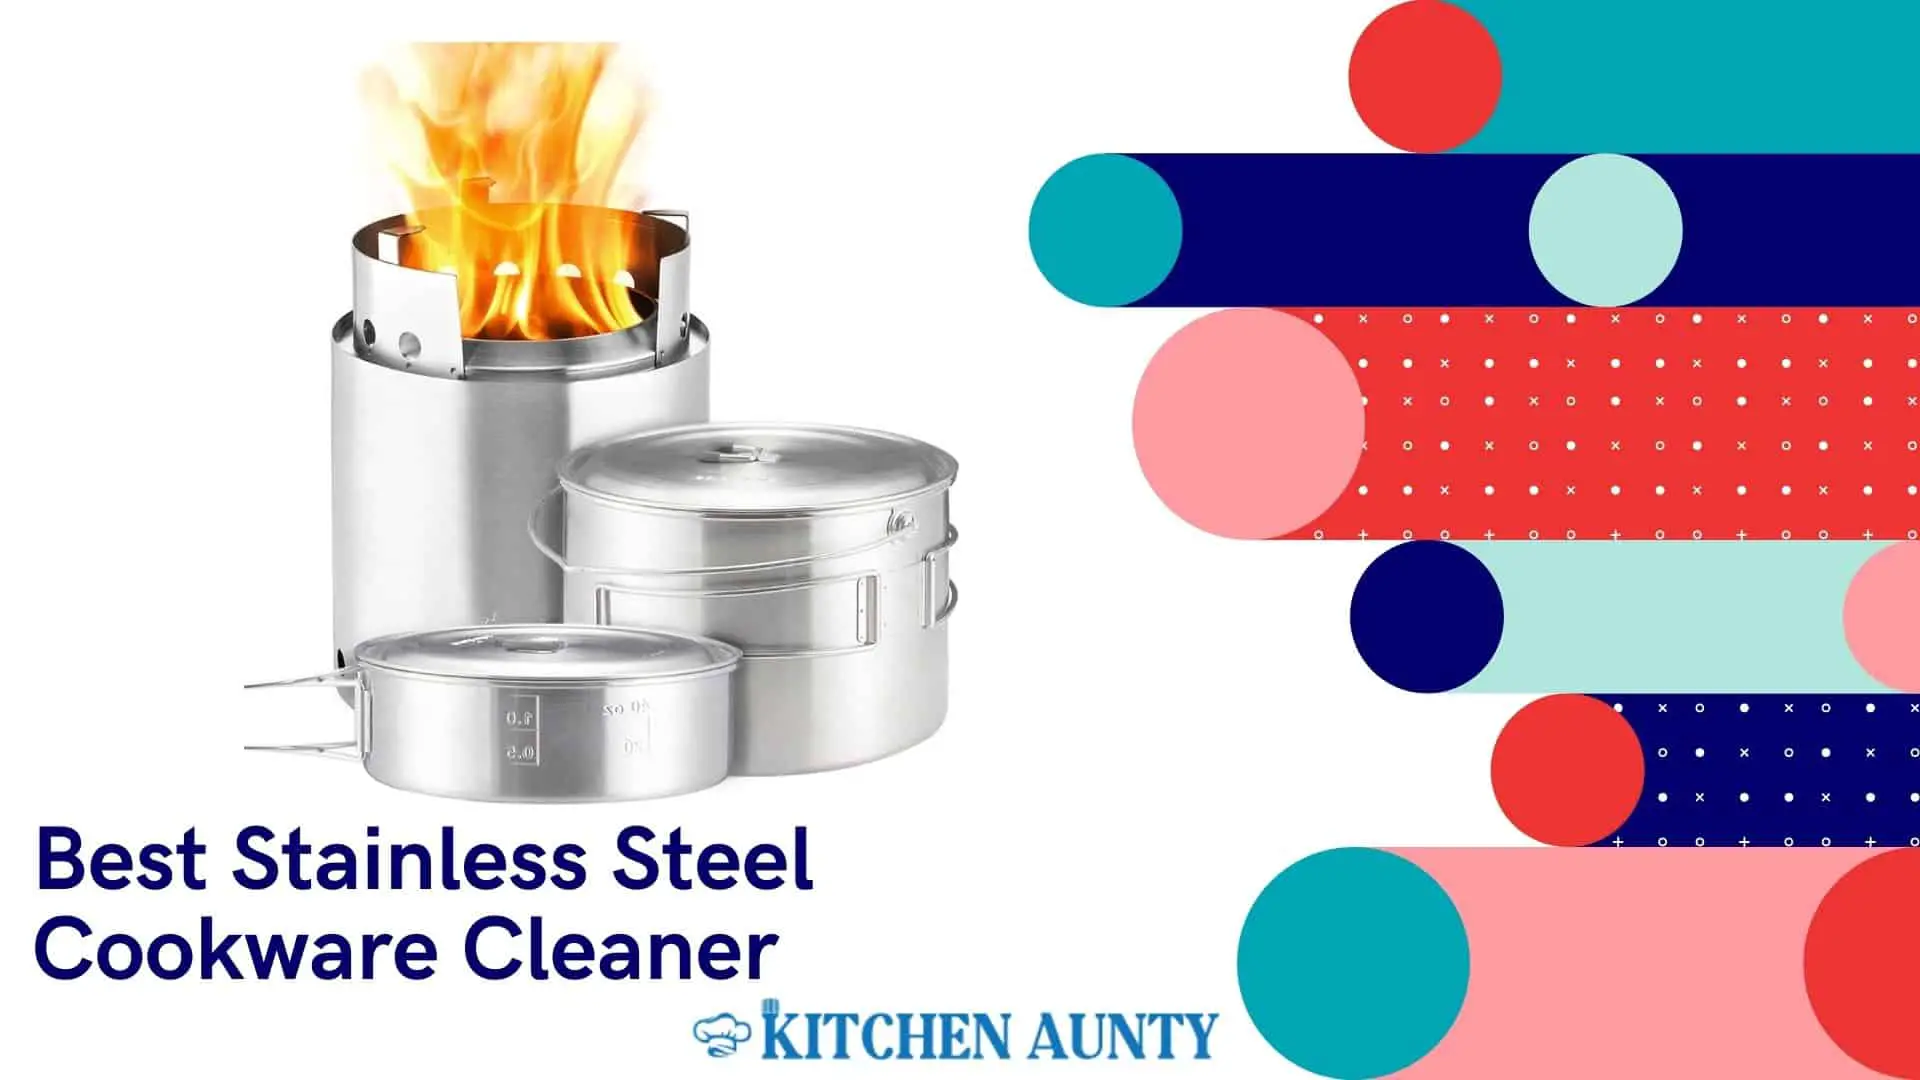 Best Stainless Steel Cookware Cleaner